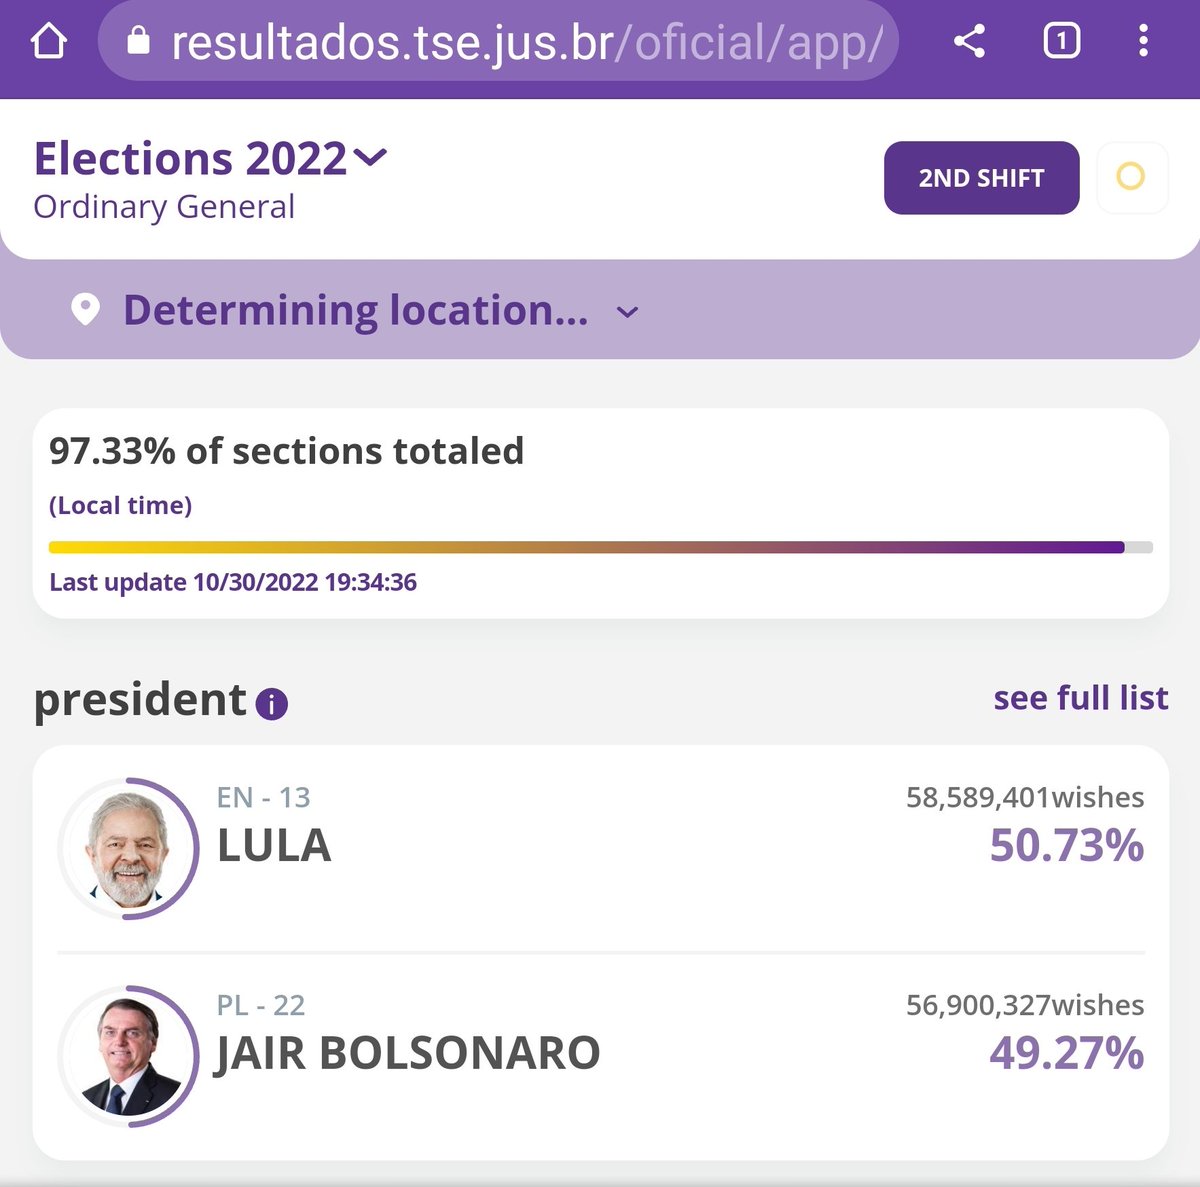 Fascinating watching the results of the Brazilian Election online. Votes are all electronic and compulsory voting for every adult between 16 and 70. Electronic voting introduced in 1996. Good for democracy and the world that Lula is ahead and about to win.